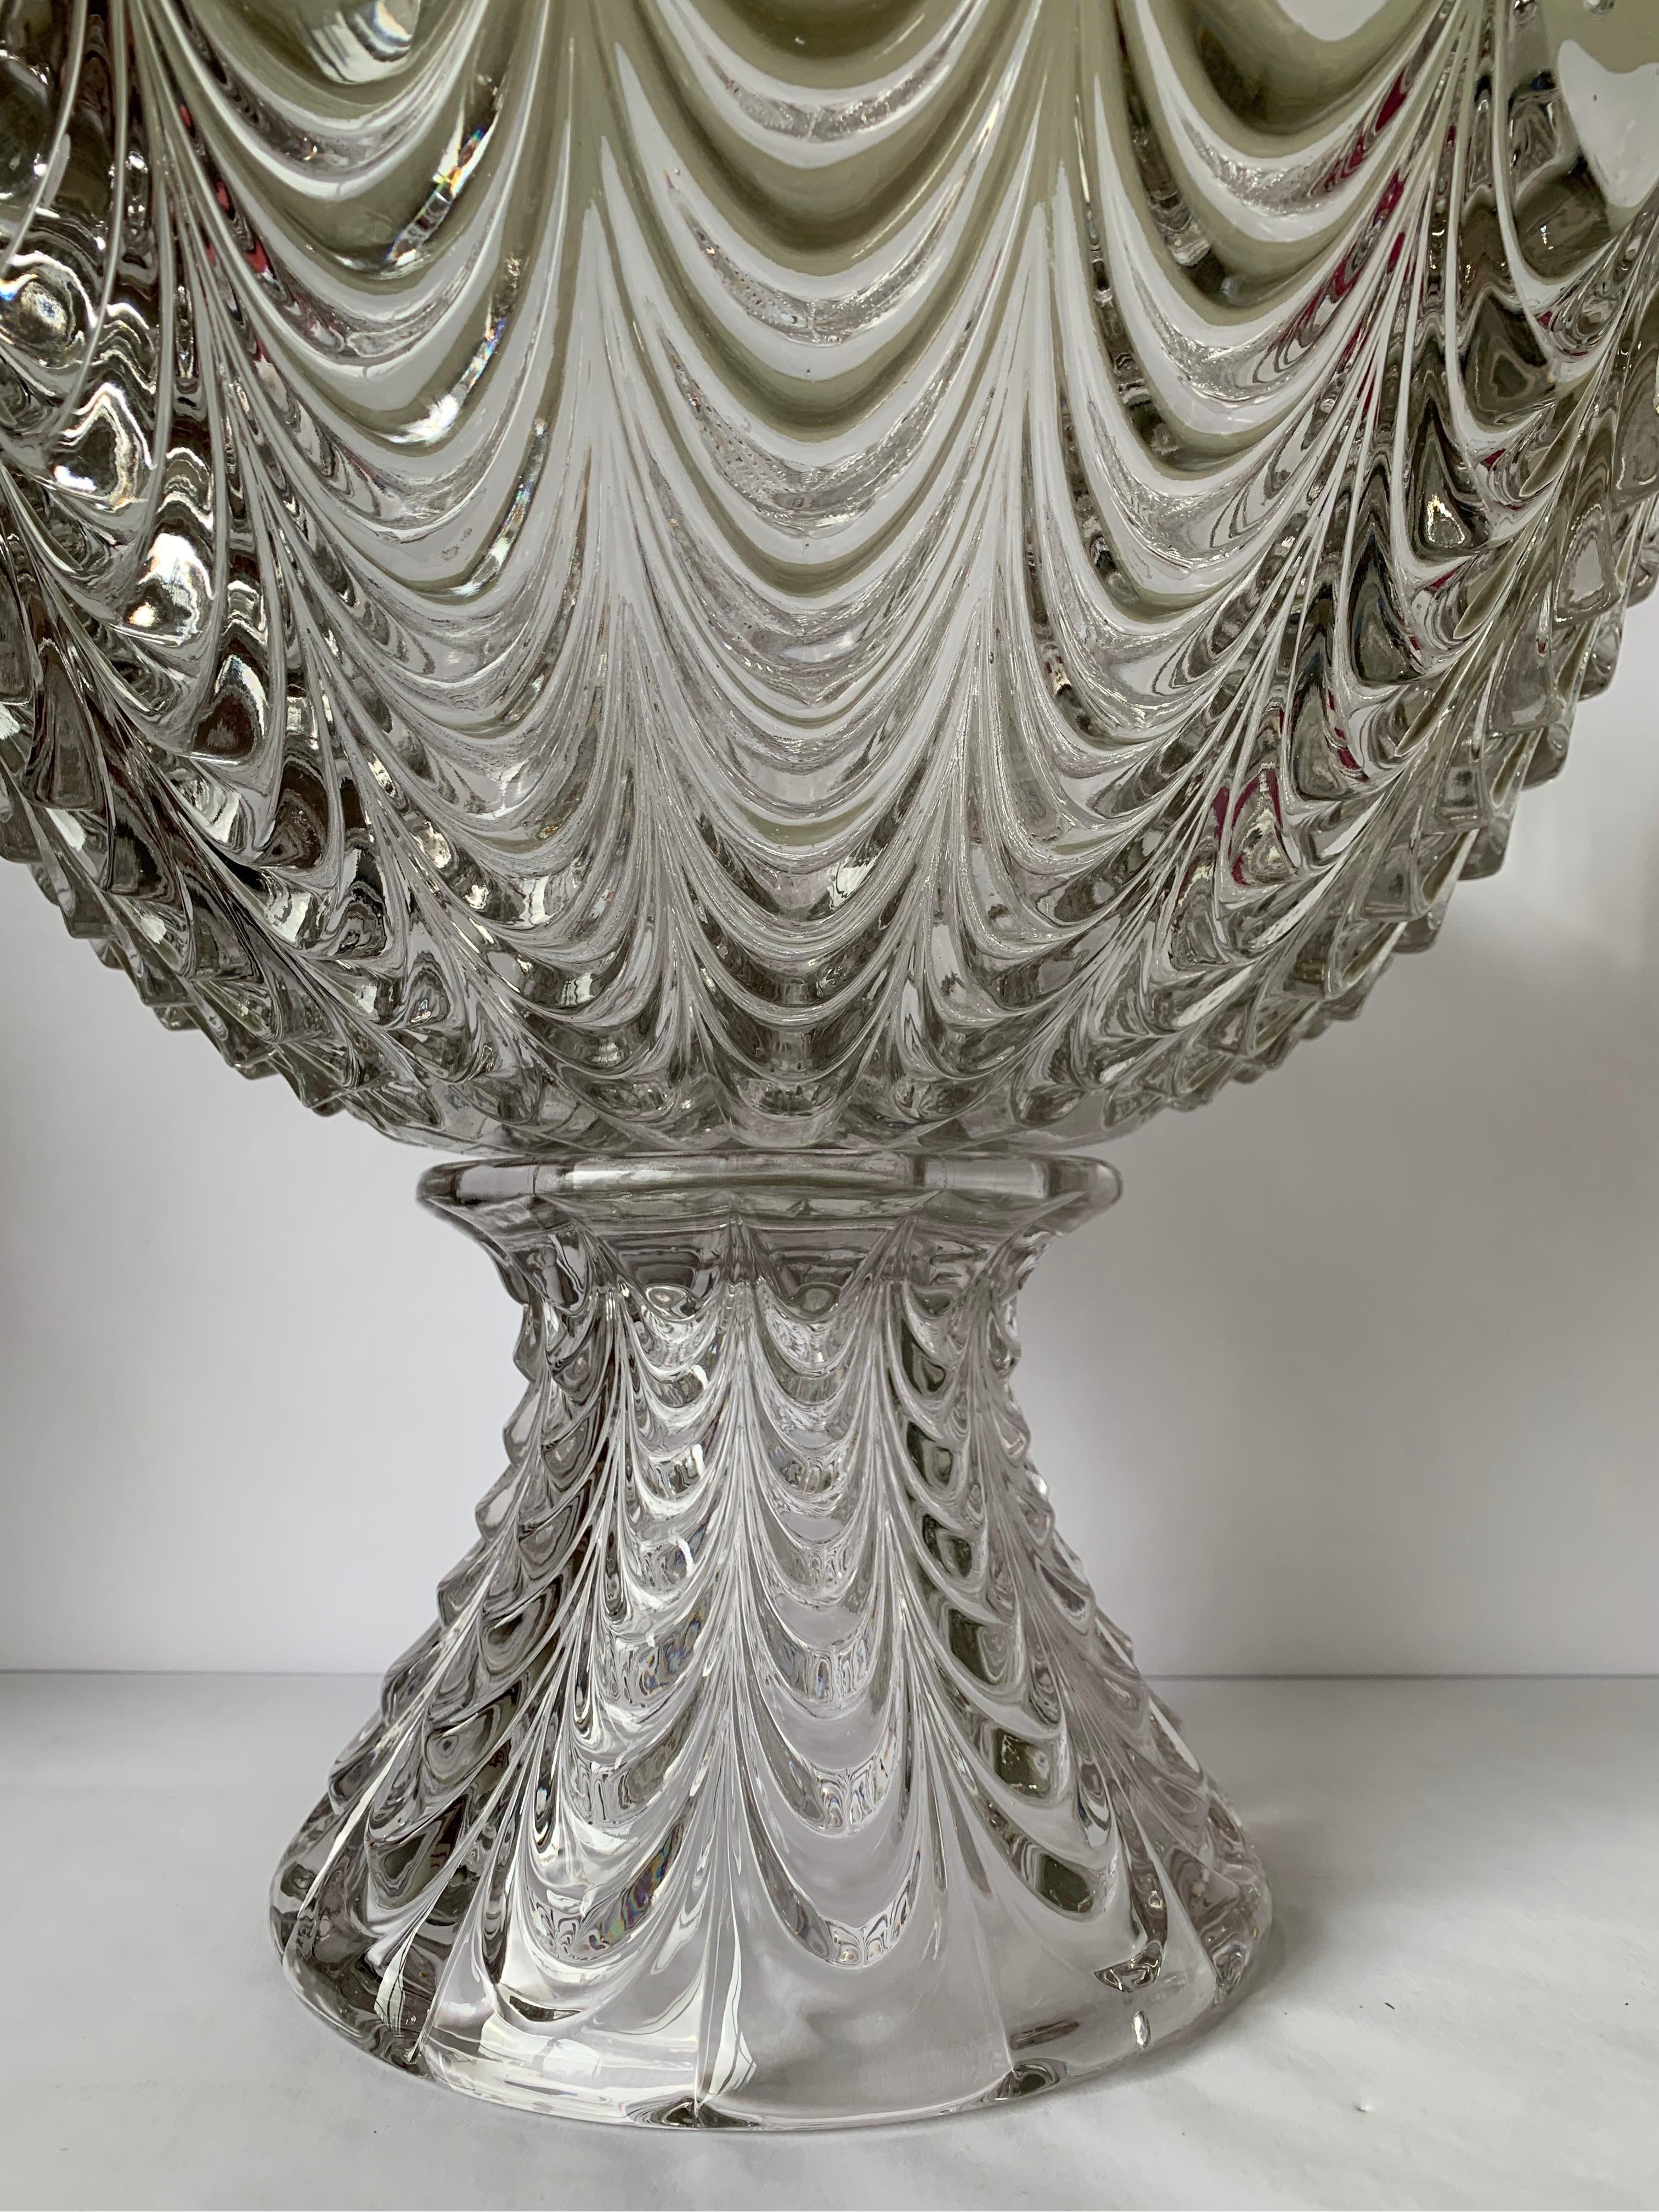 19th Century American Pressed Glass Peacock Pattern Punchbowl on Stand